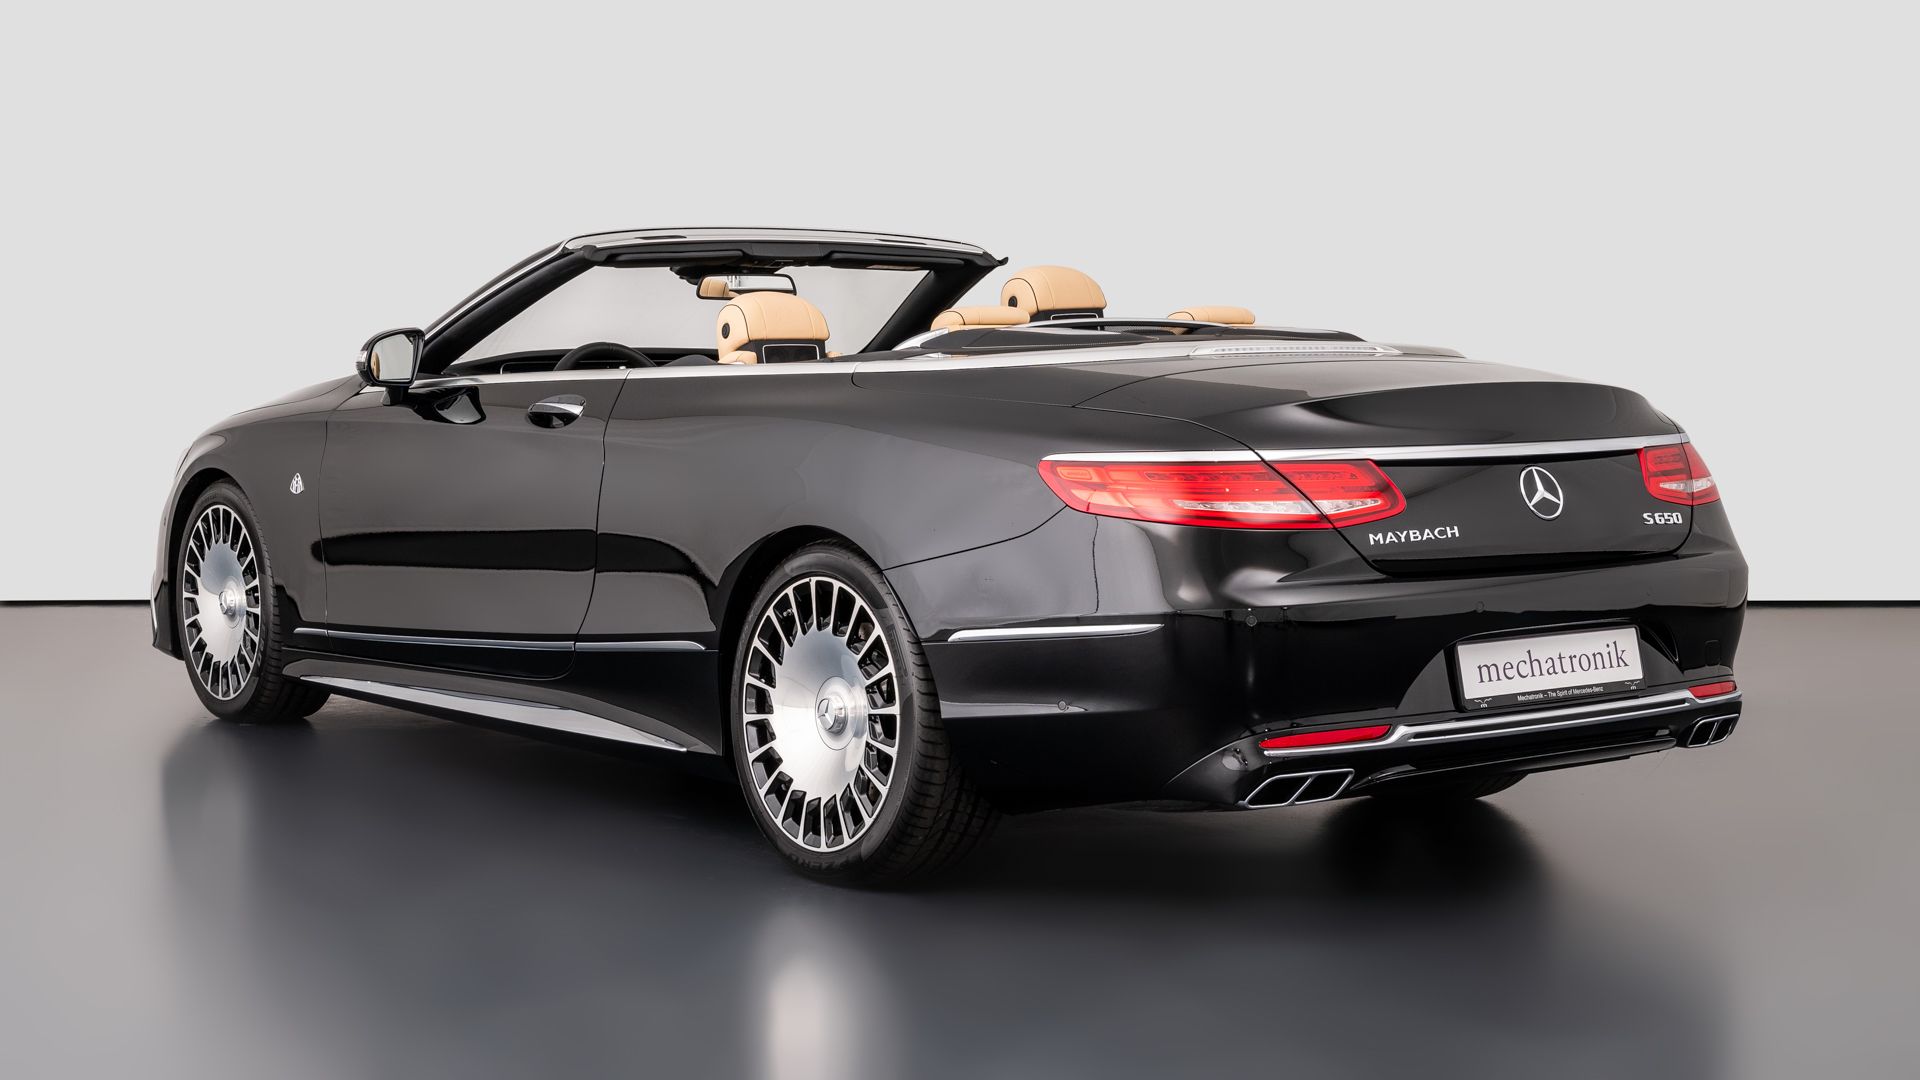 At 357k Delivery Mileage 2018 Mercedes Maybach S650 Cabrio Is A Stranger To Depreciation Carscoops